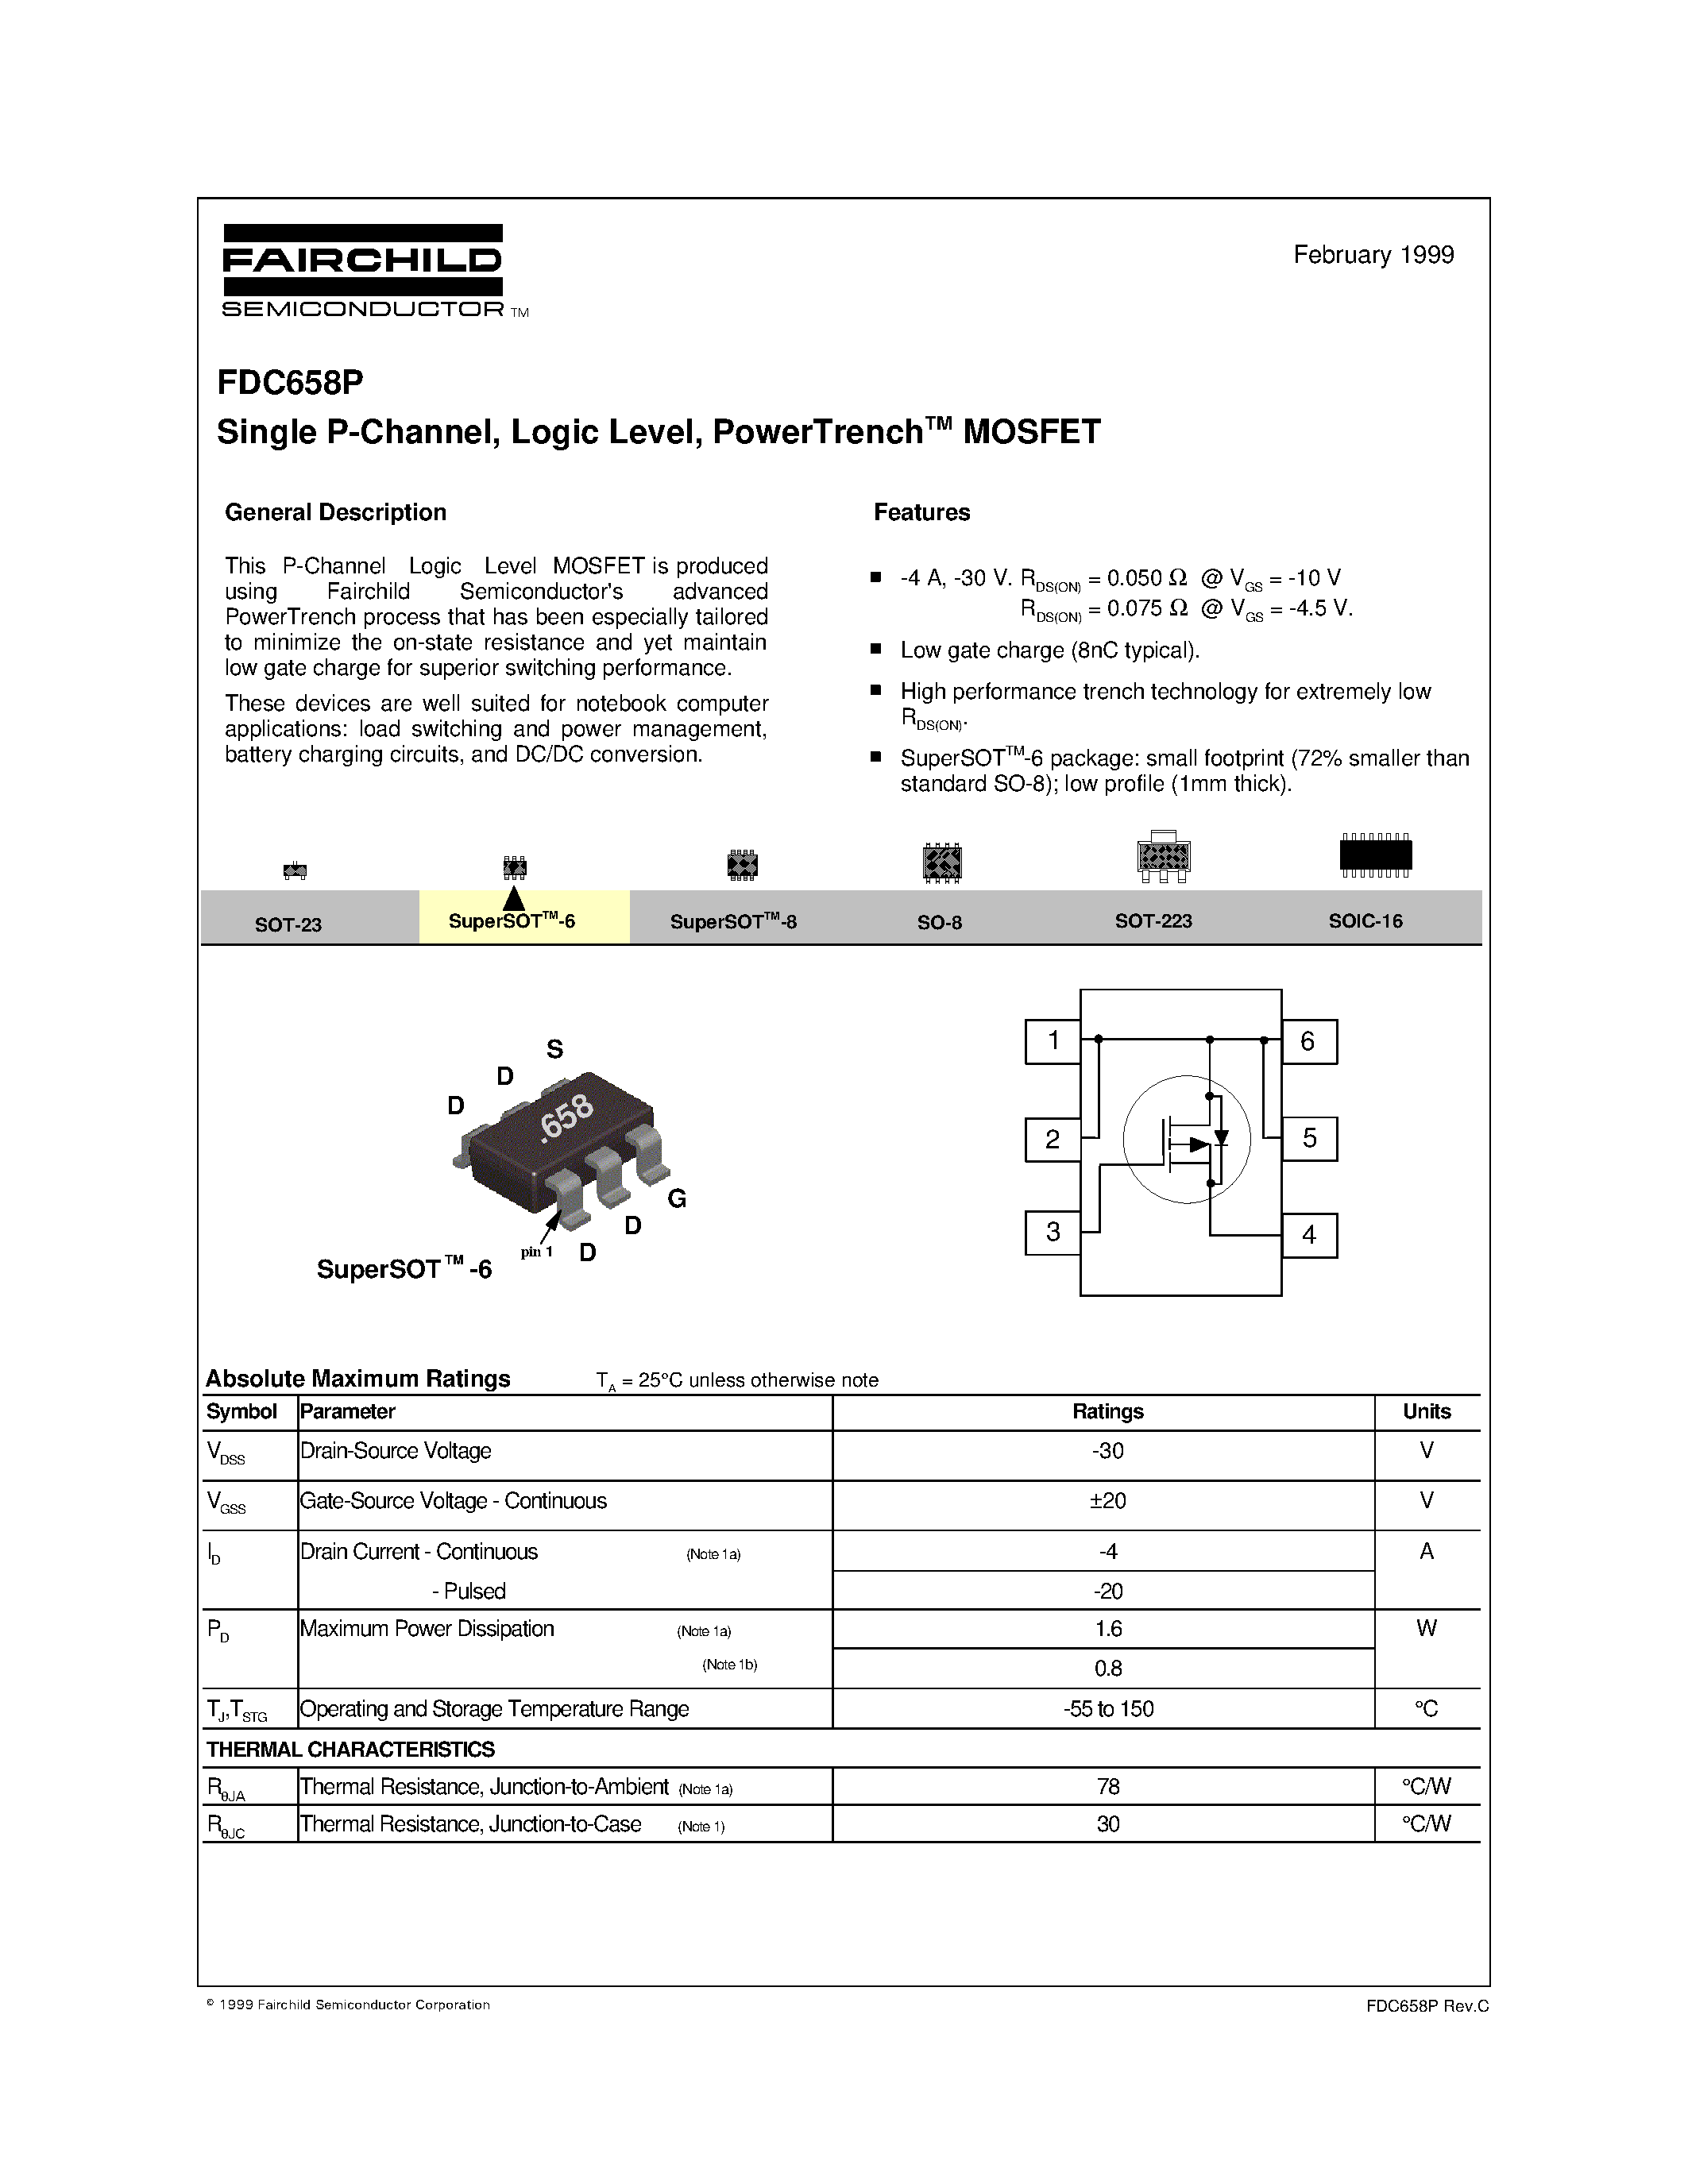 Даташит FDC658P - Single P-Channel/ Logic Level/ PowerTrenchTM MOSFET страница 1